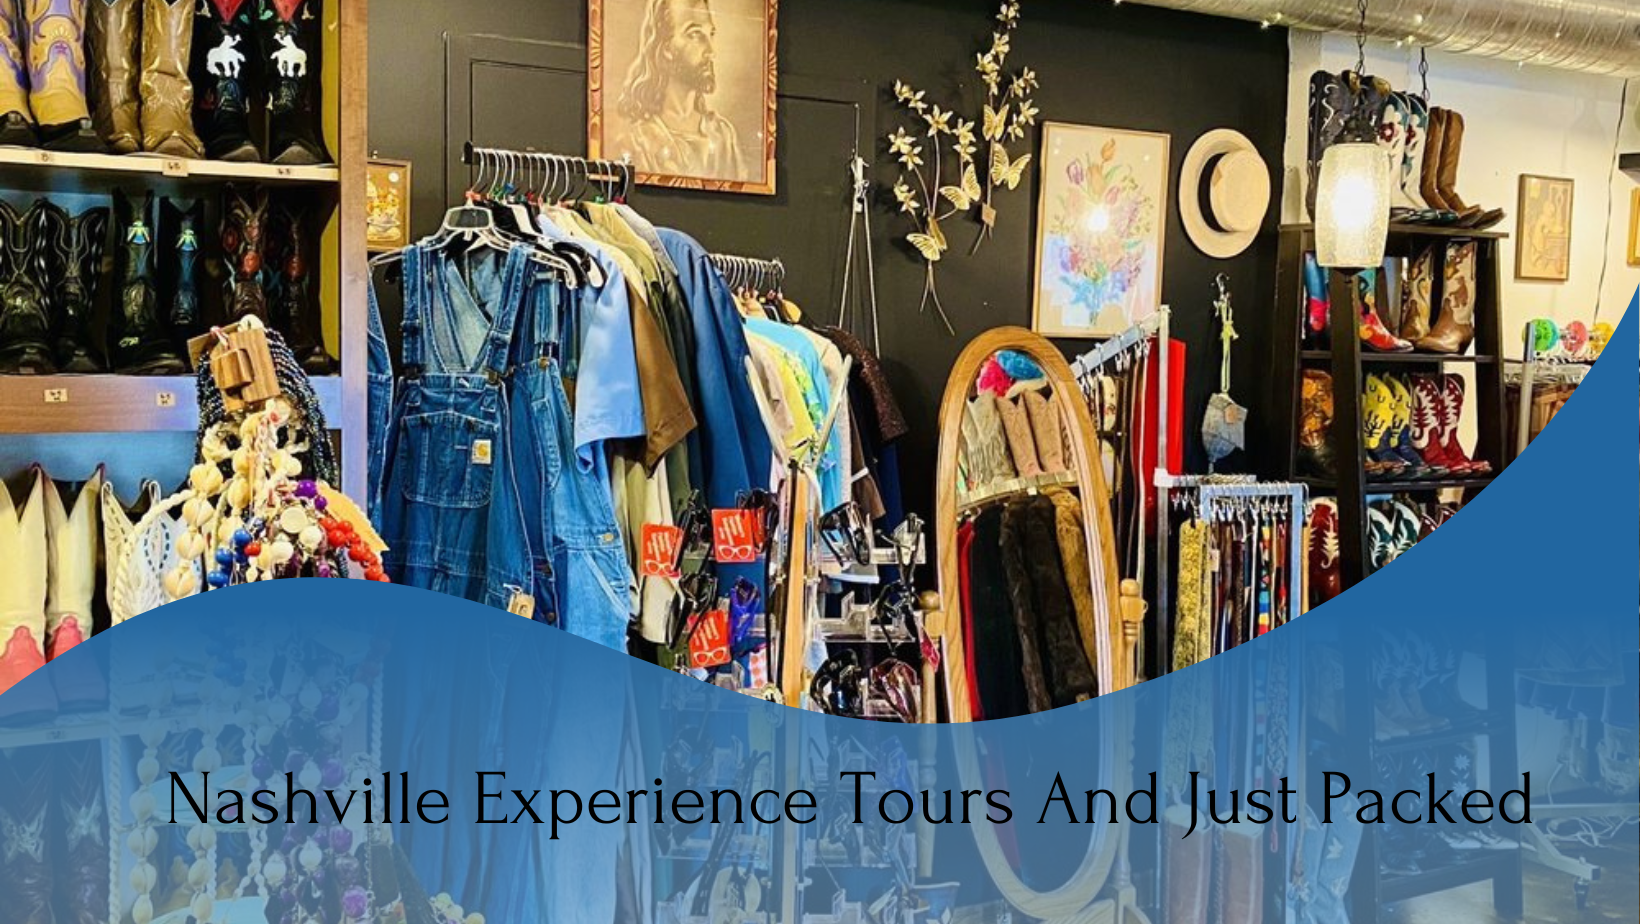 A vibrant thrift store interior showcasing a variety of clothing items and a written text of "Nashville Experience Tours and Just Packed".